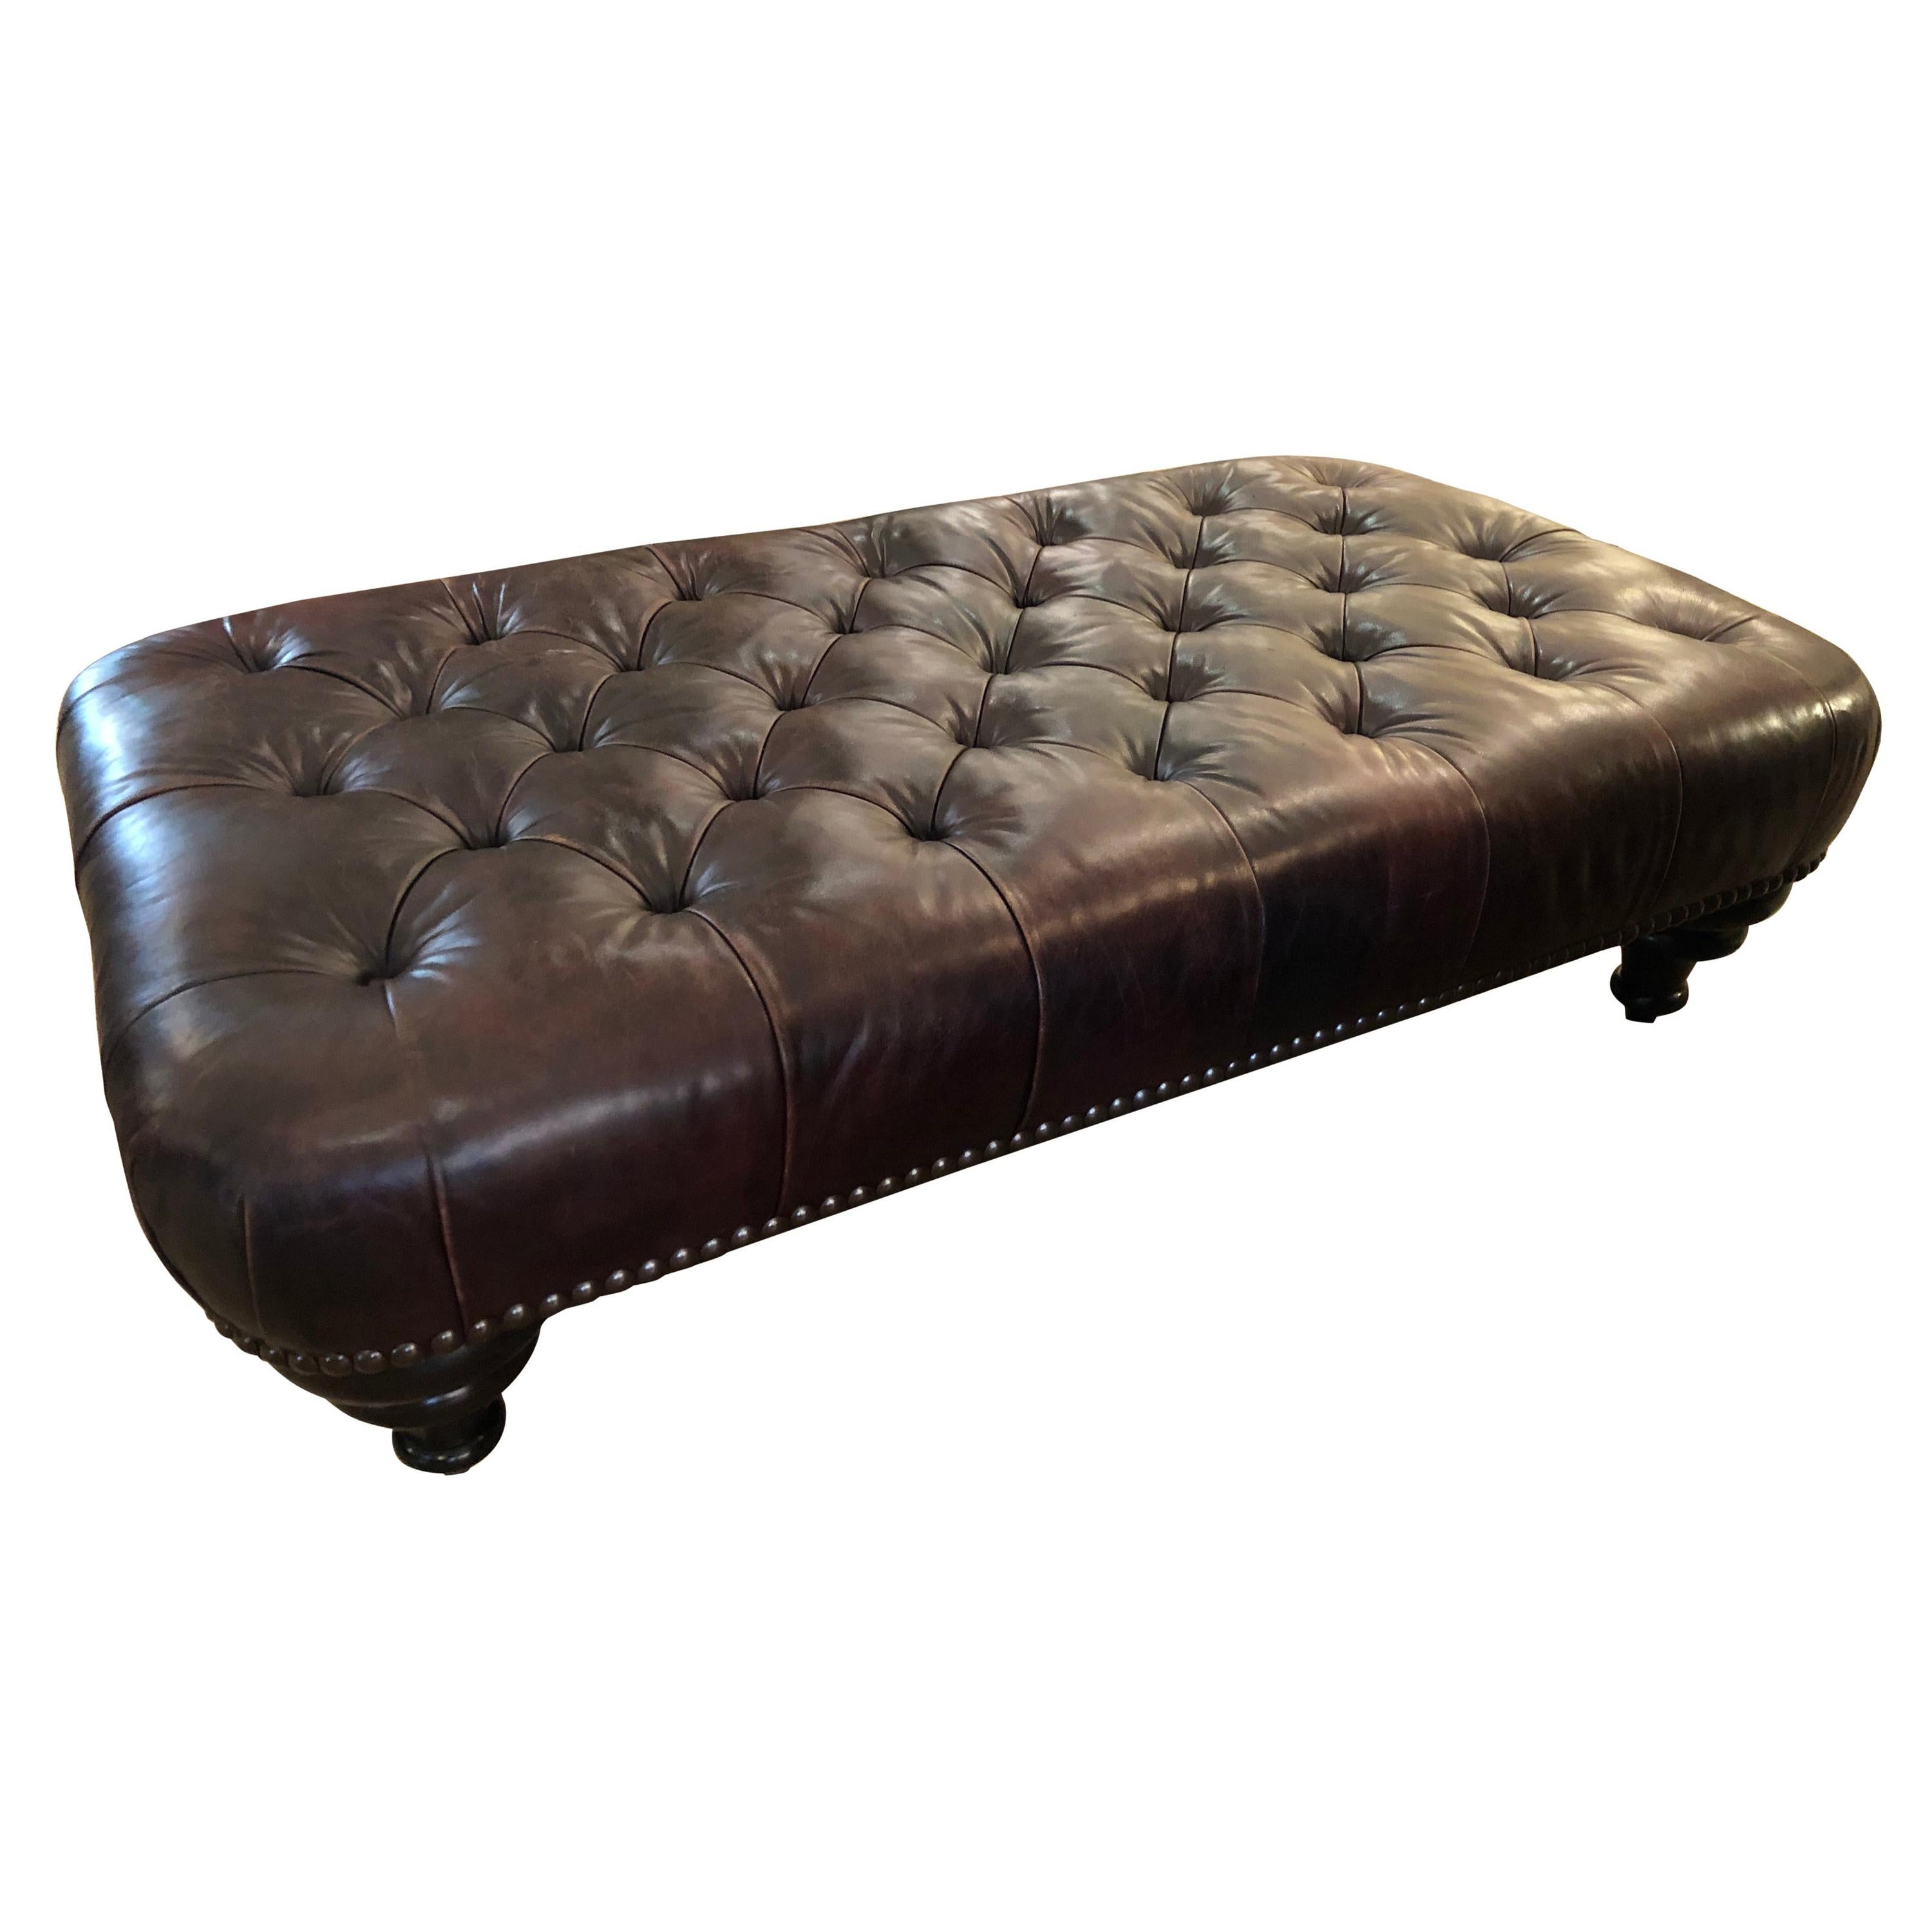 Classic Rich Luxe Tobacco Tufted Leather Chesterfield Style George Smith Ottoman